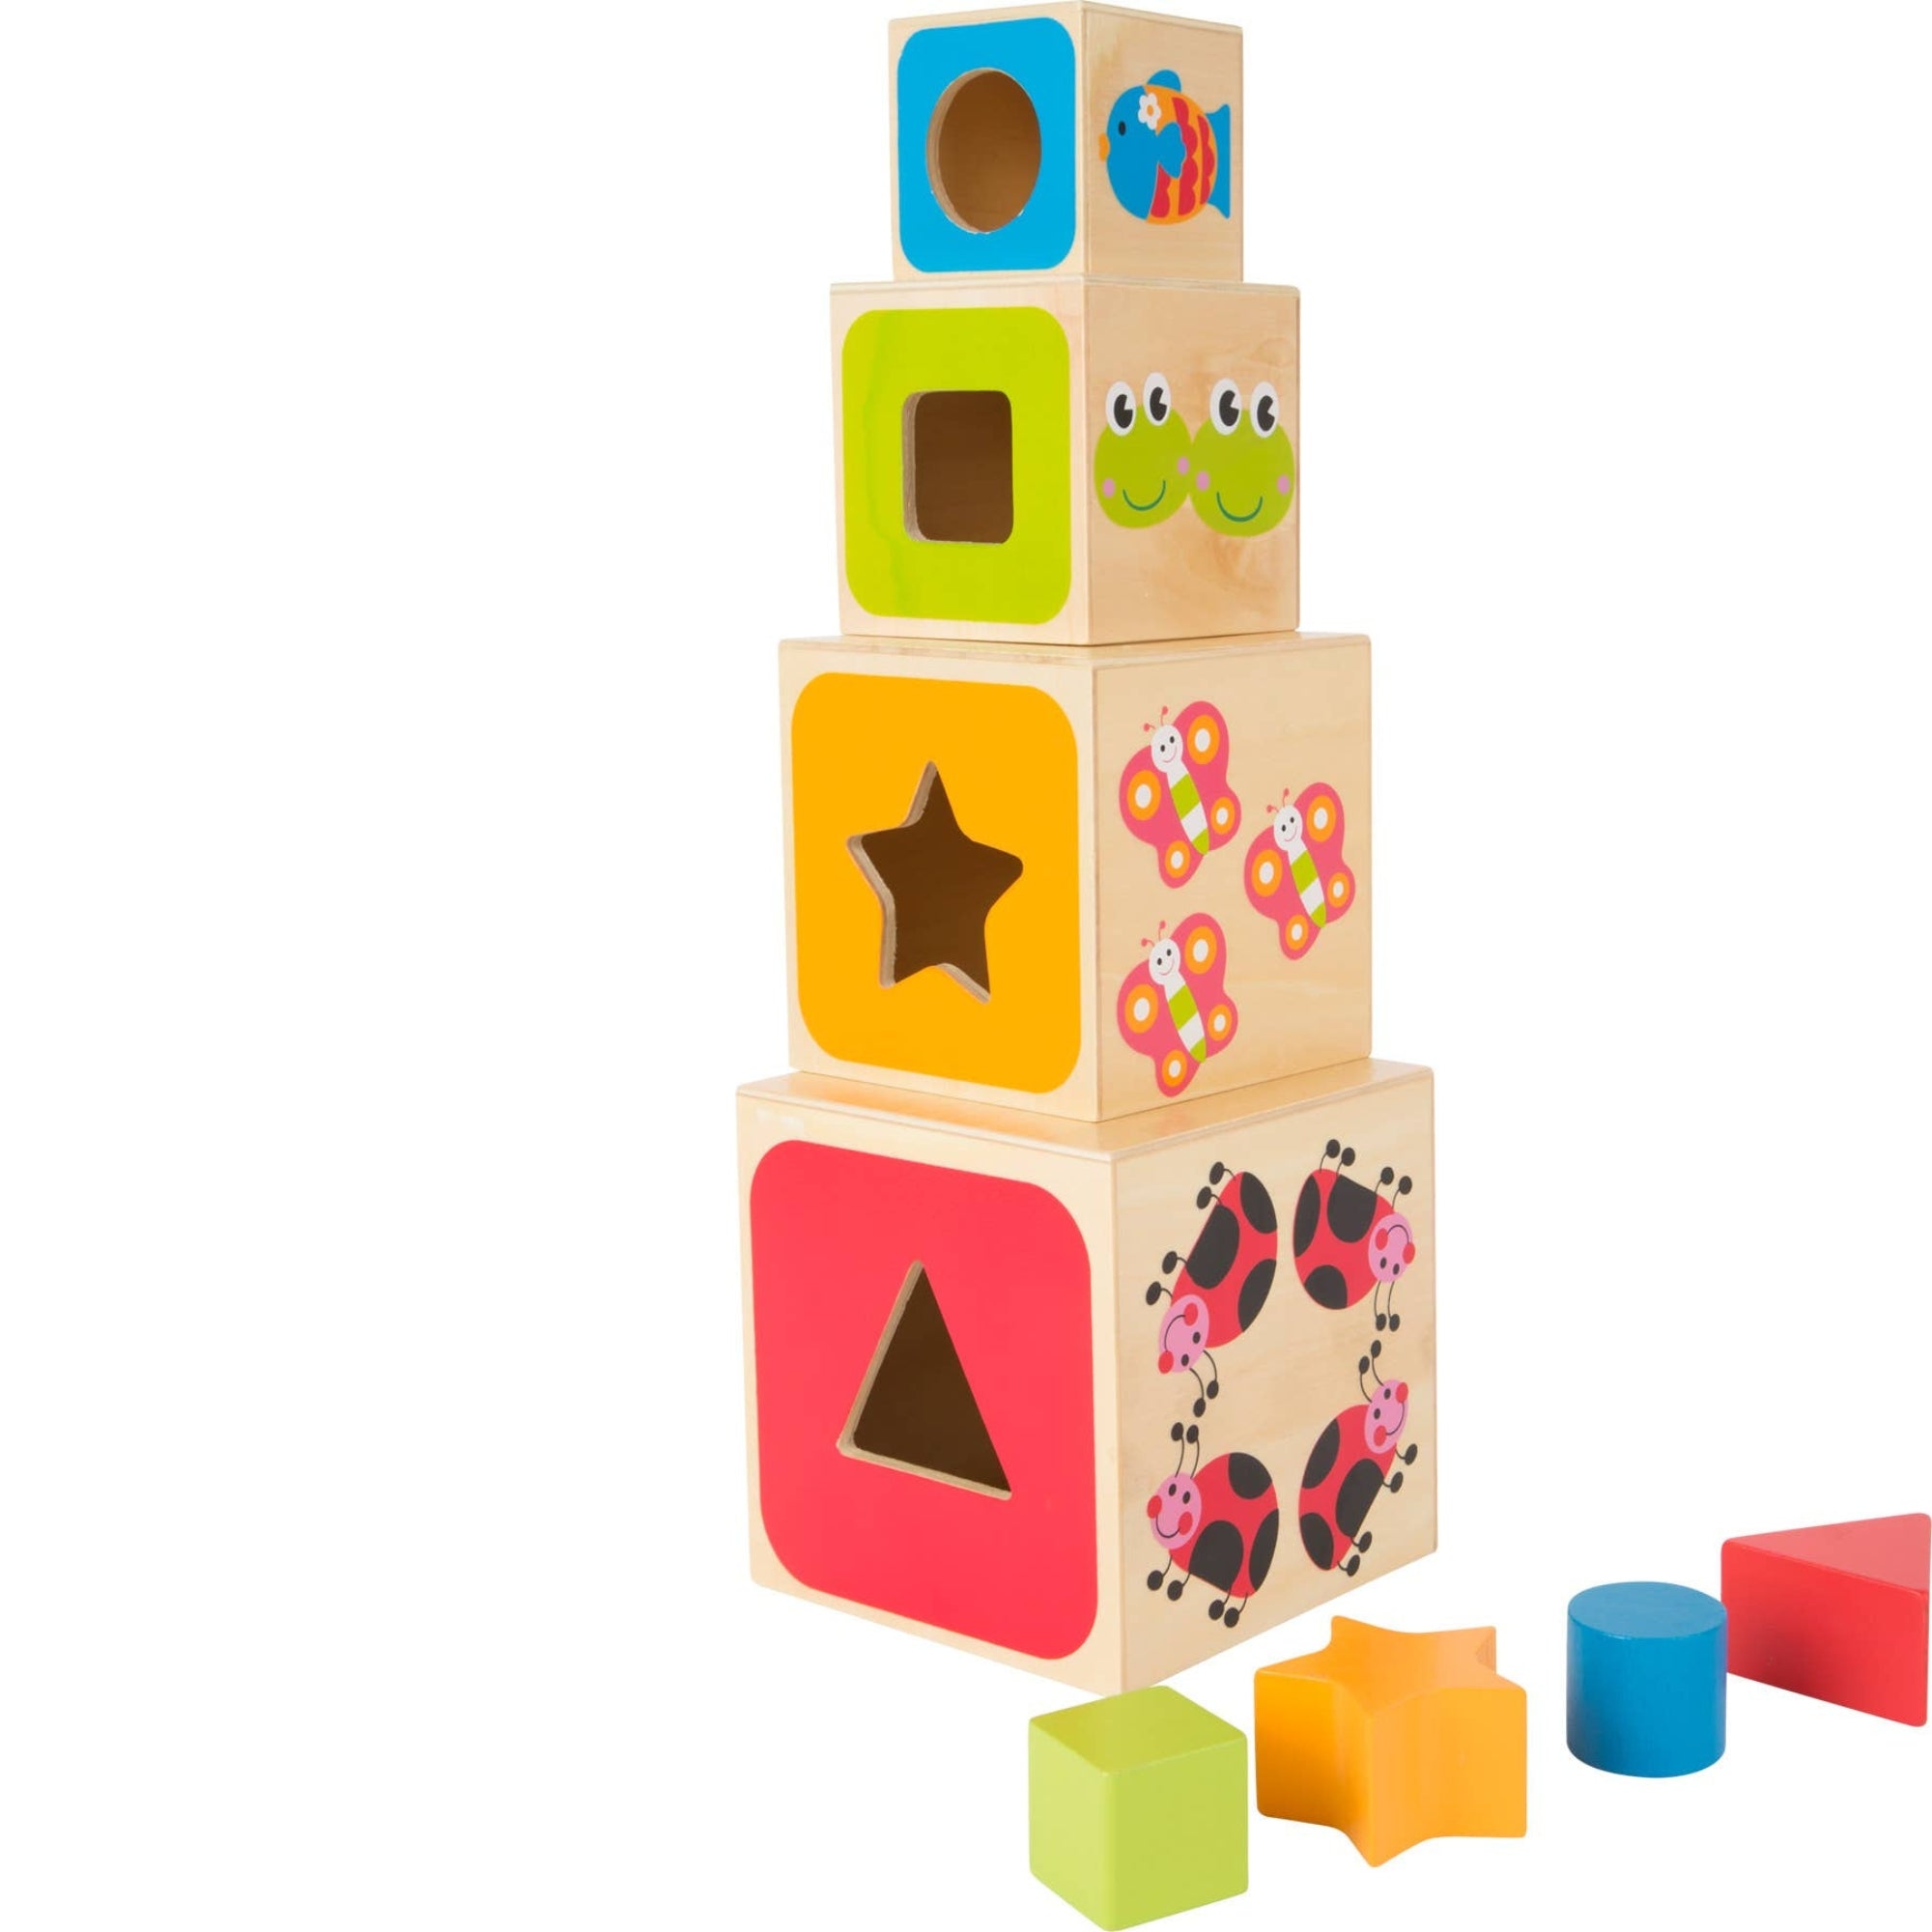 Abc Stacking Cubes, Graduating in size, these delightful Abc Stacking Cubes need to be stacked in the correct order, from largest to smallest, to create a tower. Each Abc Stacking Cubes features a detailed scene with numbers and animals. As little ones stack each Abc Stacking Cubes, they can discuss the pet on one side, developing their language skills and vocabulary. Perfect for early learning, these cubes are a versatile learning aid. Abc Stacking Cubes Once playtime is over, the stacking blocks nest toge